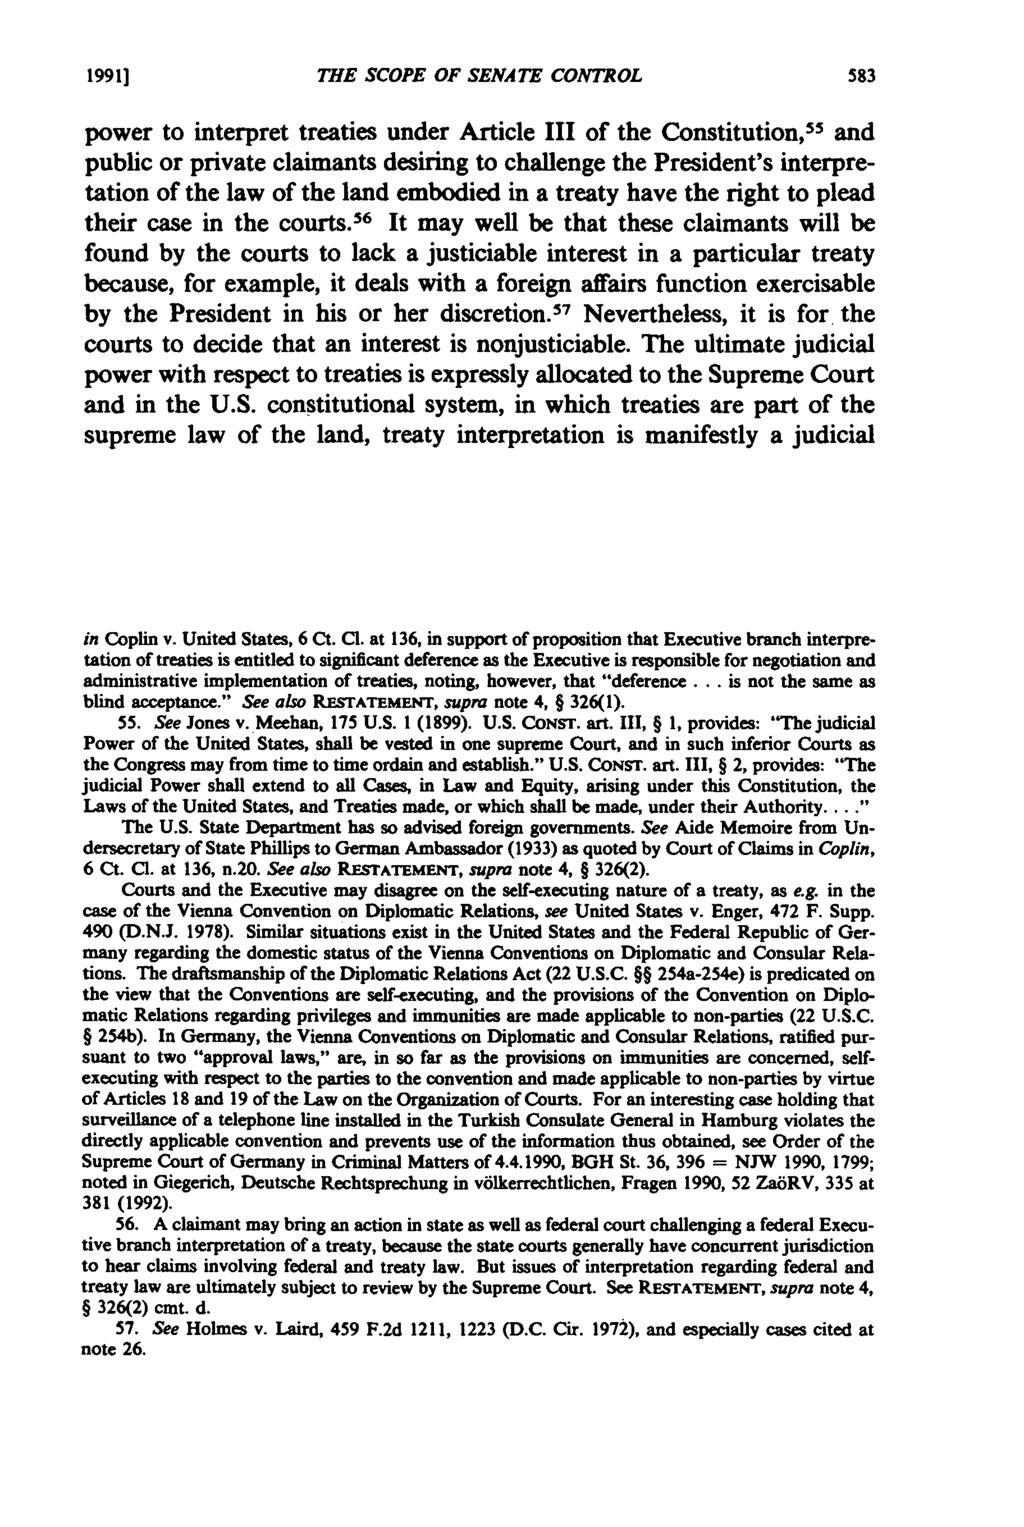 1991] THE SCOPE OF SENATE CONTROL power to interpret treaties under Article III of the Constitution," and public or private claimants desiring to challenge the President's interpretation of the law